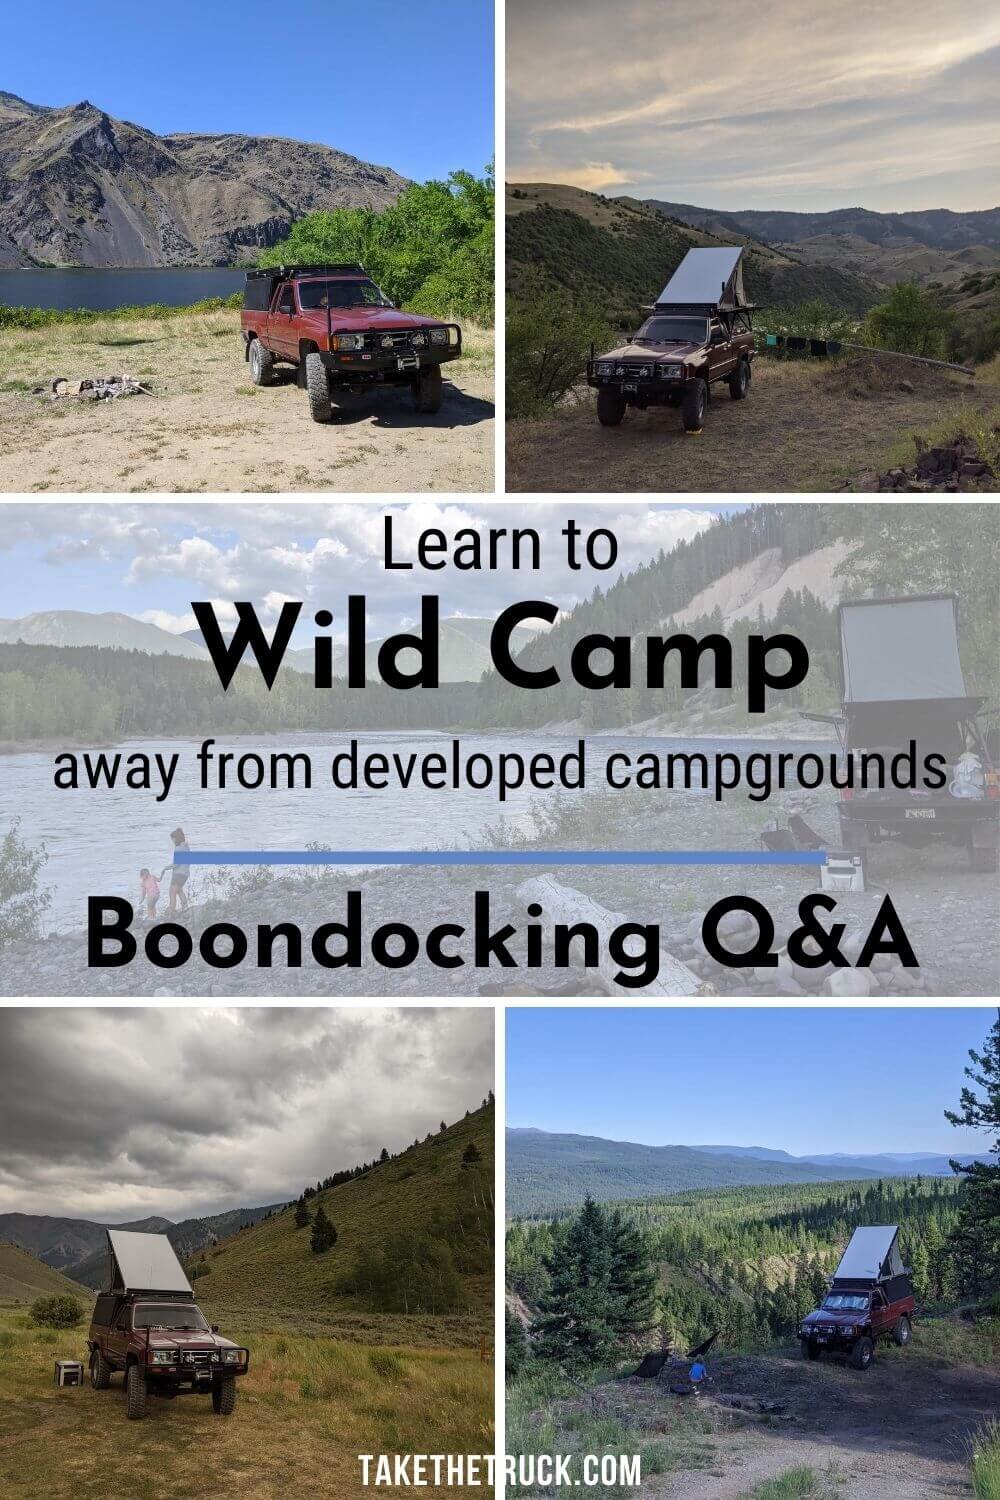 If you haven't gone primitive camping off grid and don’t think you know how, read this post! It’s full of boondocking and wild camping tips, ideas, and gear to make wild camping comfortable.